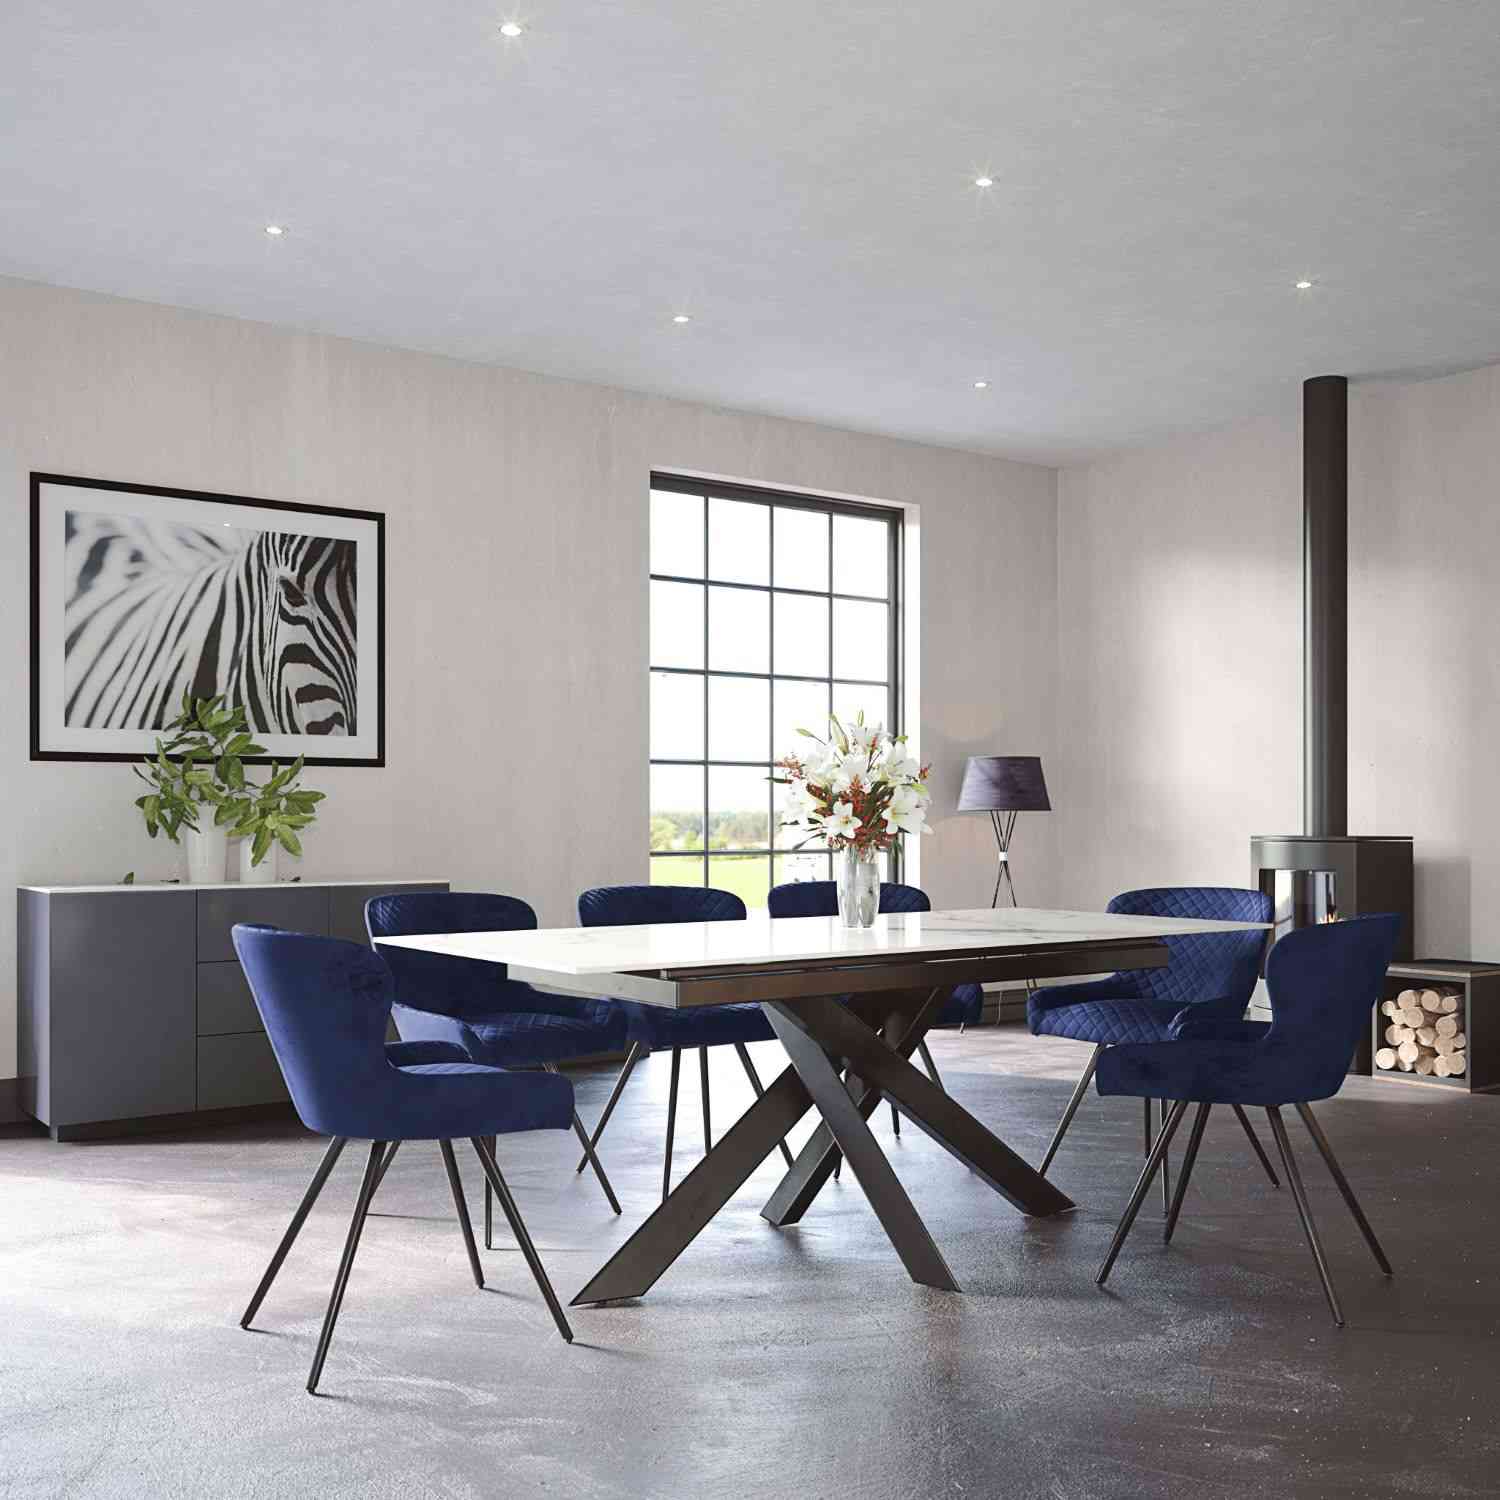 Extending Dining Table - 160cm To 200cm With 4 Blue And 2 Grey Dining Chairs